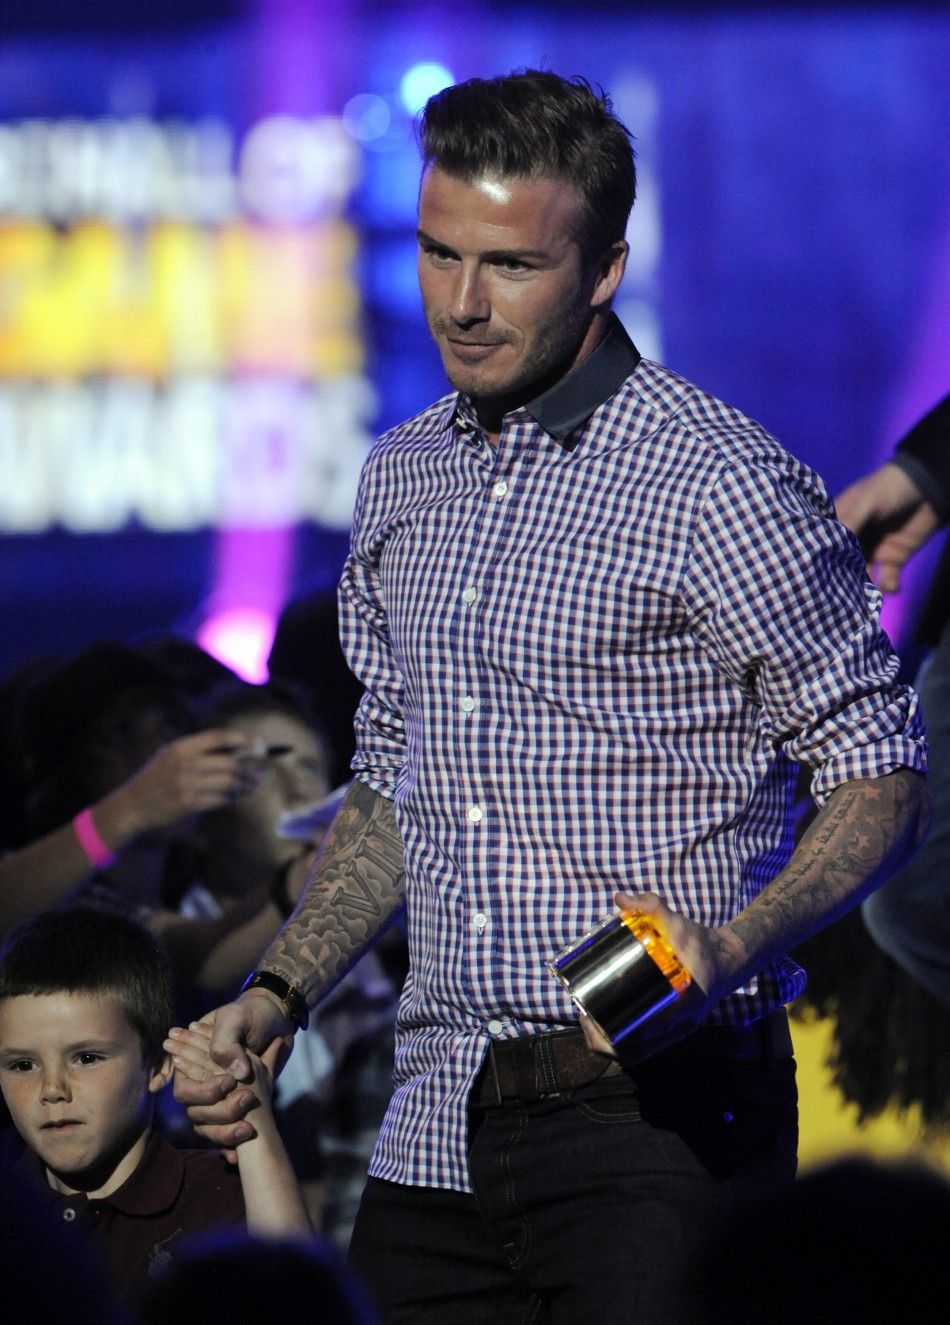 David Beckham holds his son Cruzs hand as he accepts the Thats How I Roll award